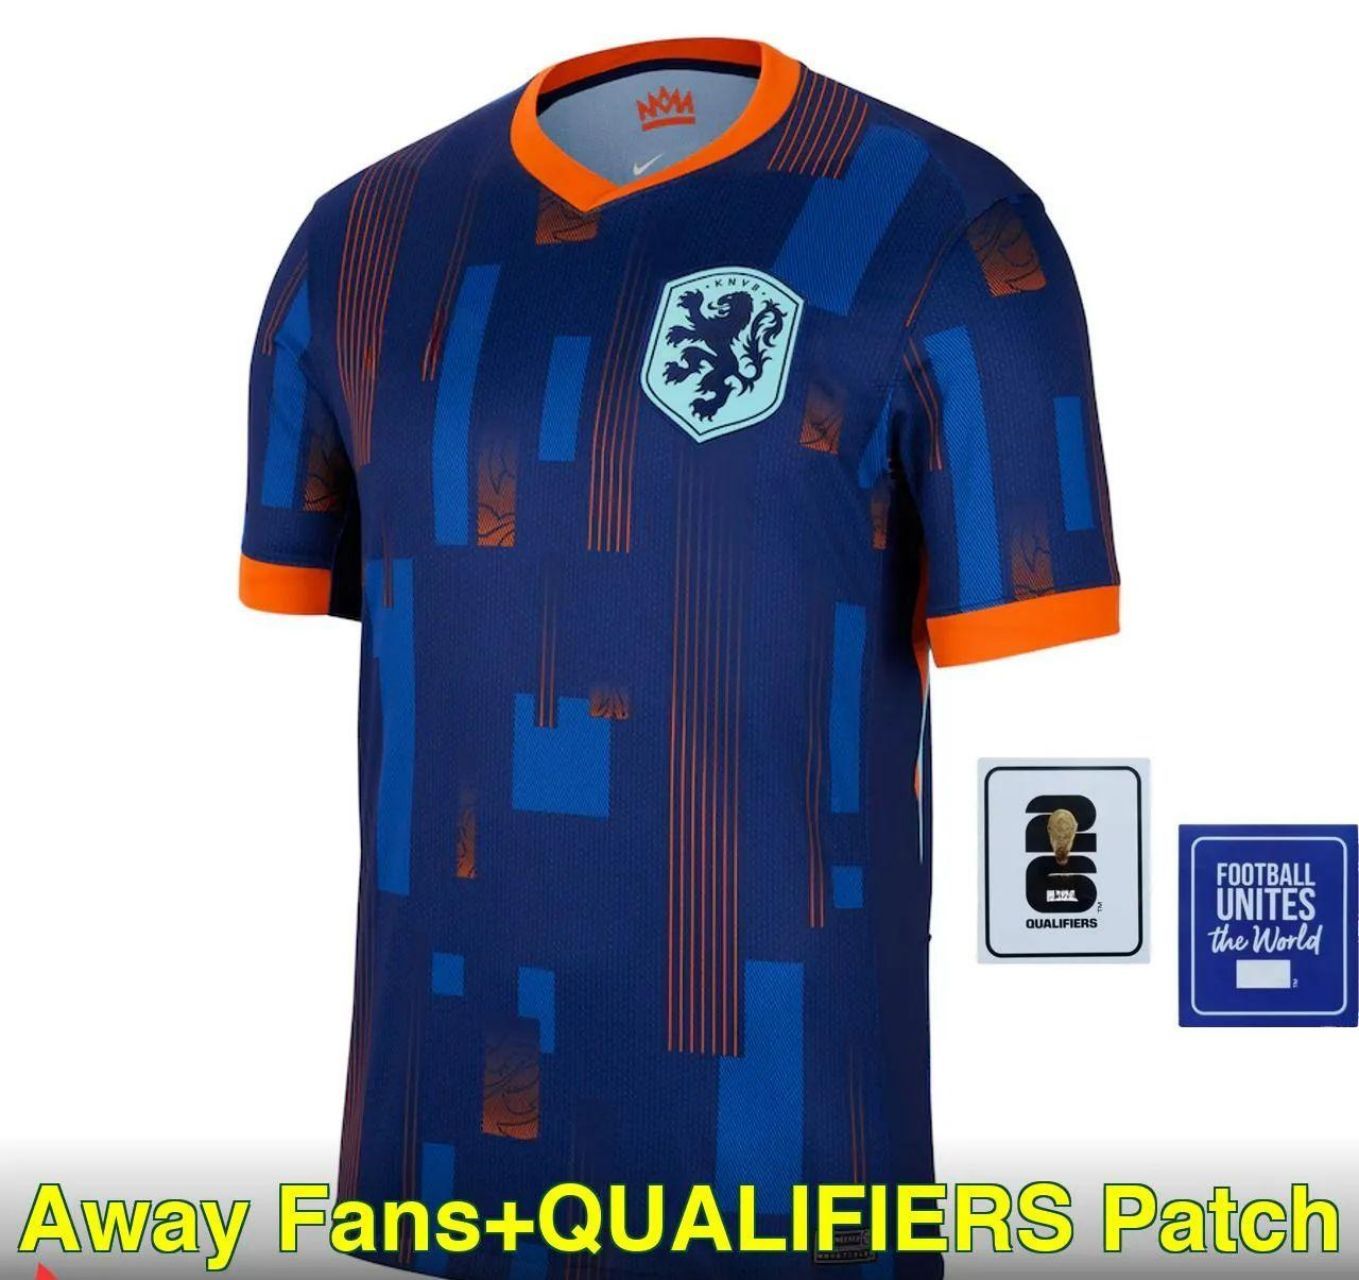 Away Fans+QUALIFIERS Patch